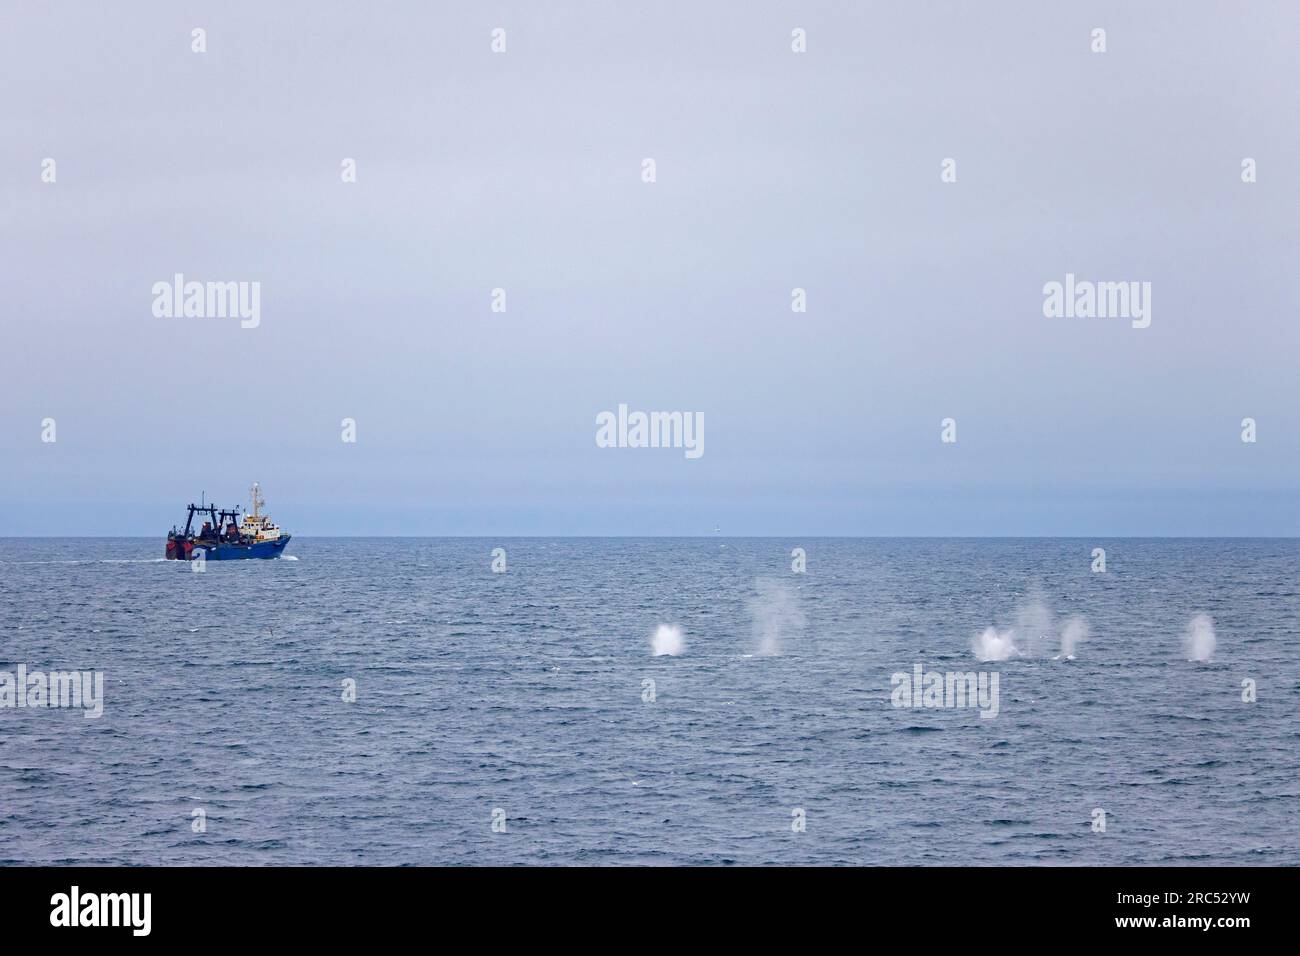 Fin whales / finback whale pod / common rorquals (Balaenoptera physalus) group surfacing and blowing in front of fishing boat, Svalbard / Spitsbergen Stock Photo